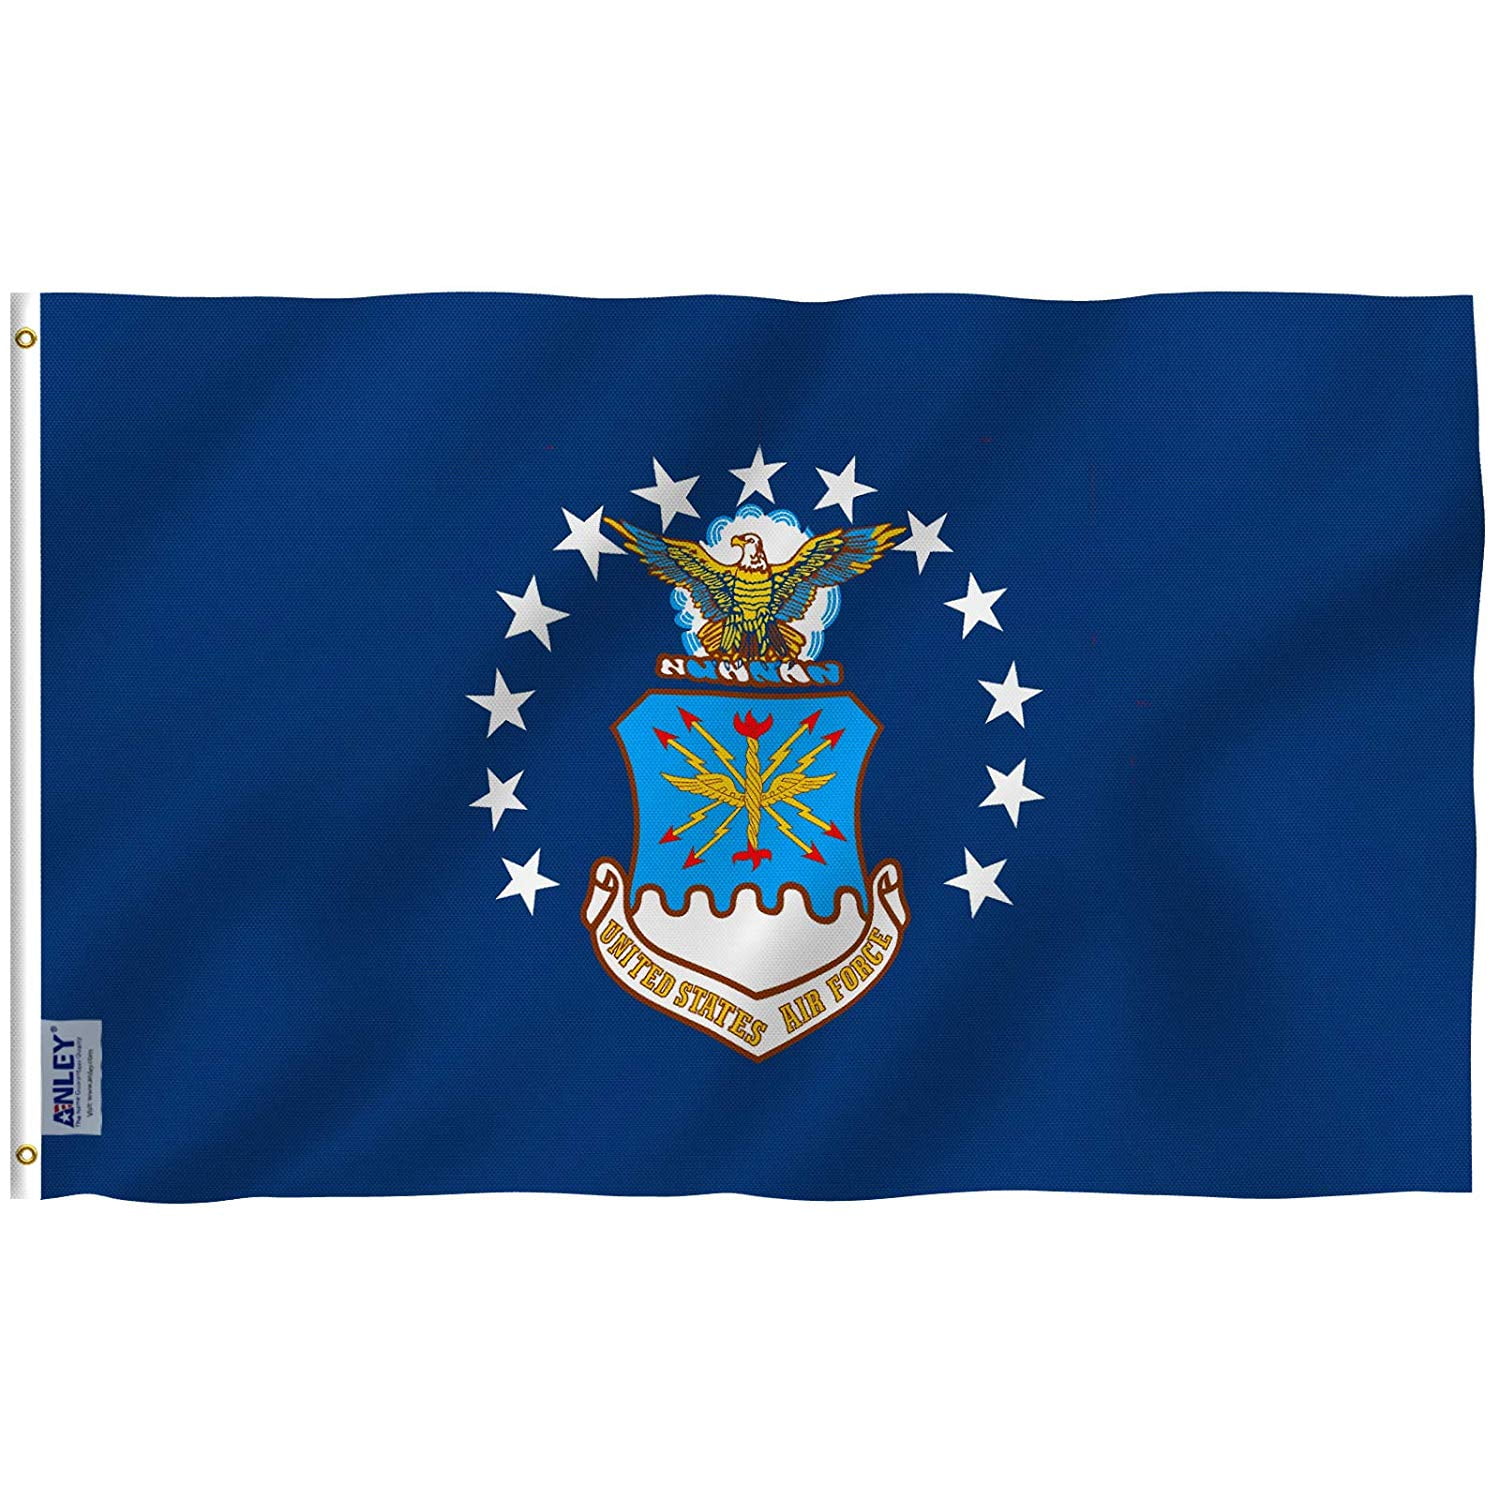 AIR FORCE FLAG EMBROIDERED MILITARY 3' X 5' POLYESTER DOUBLE SIDED U.S